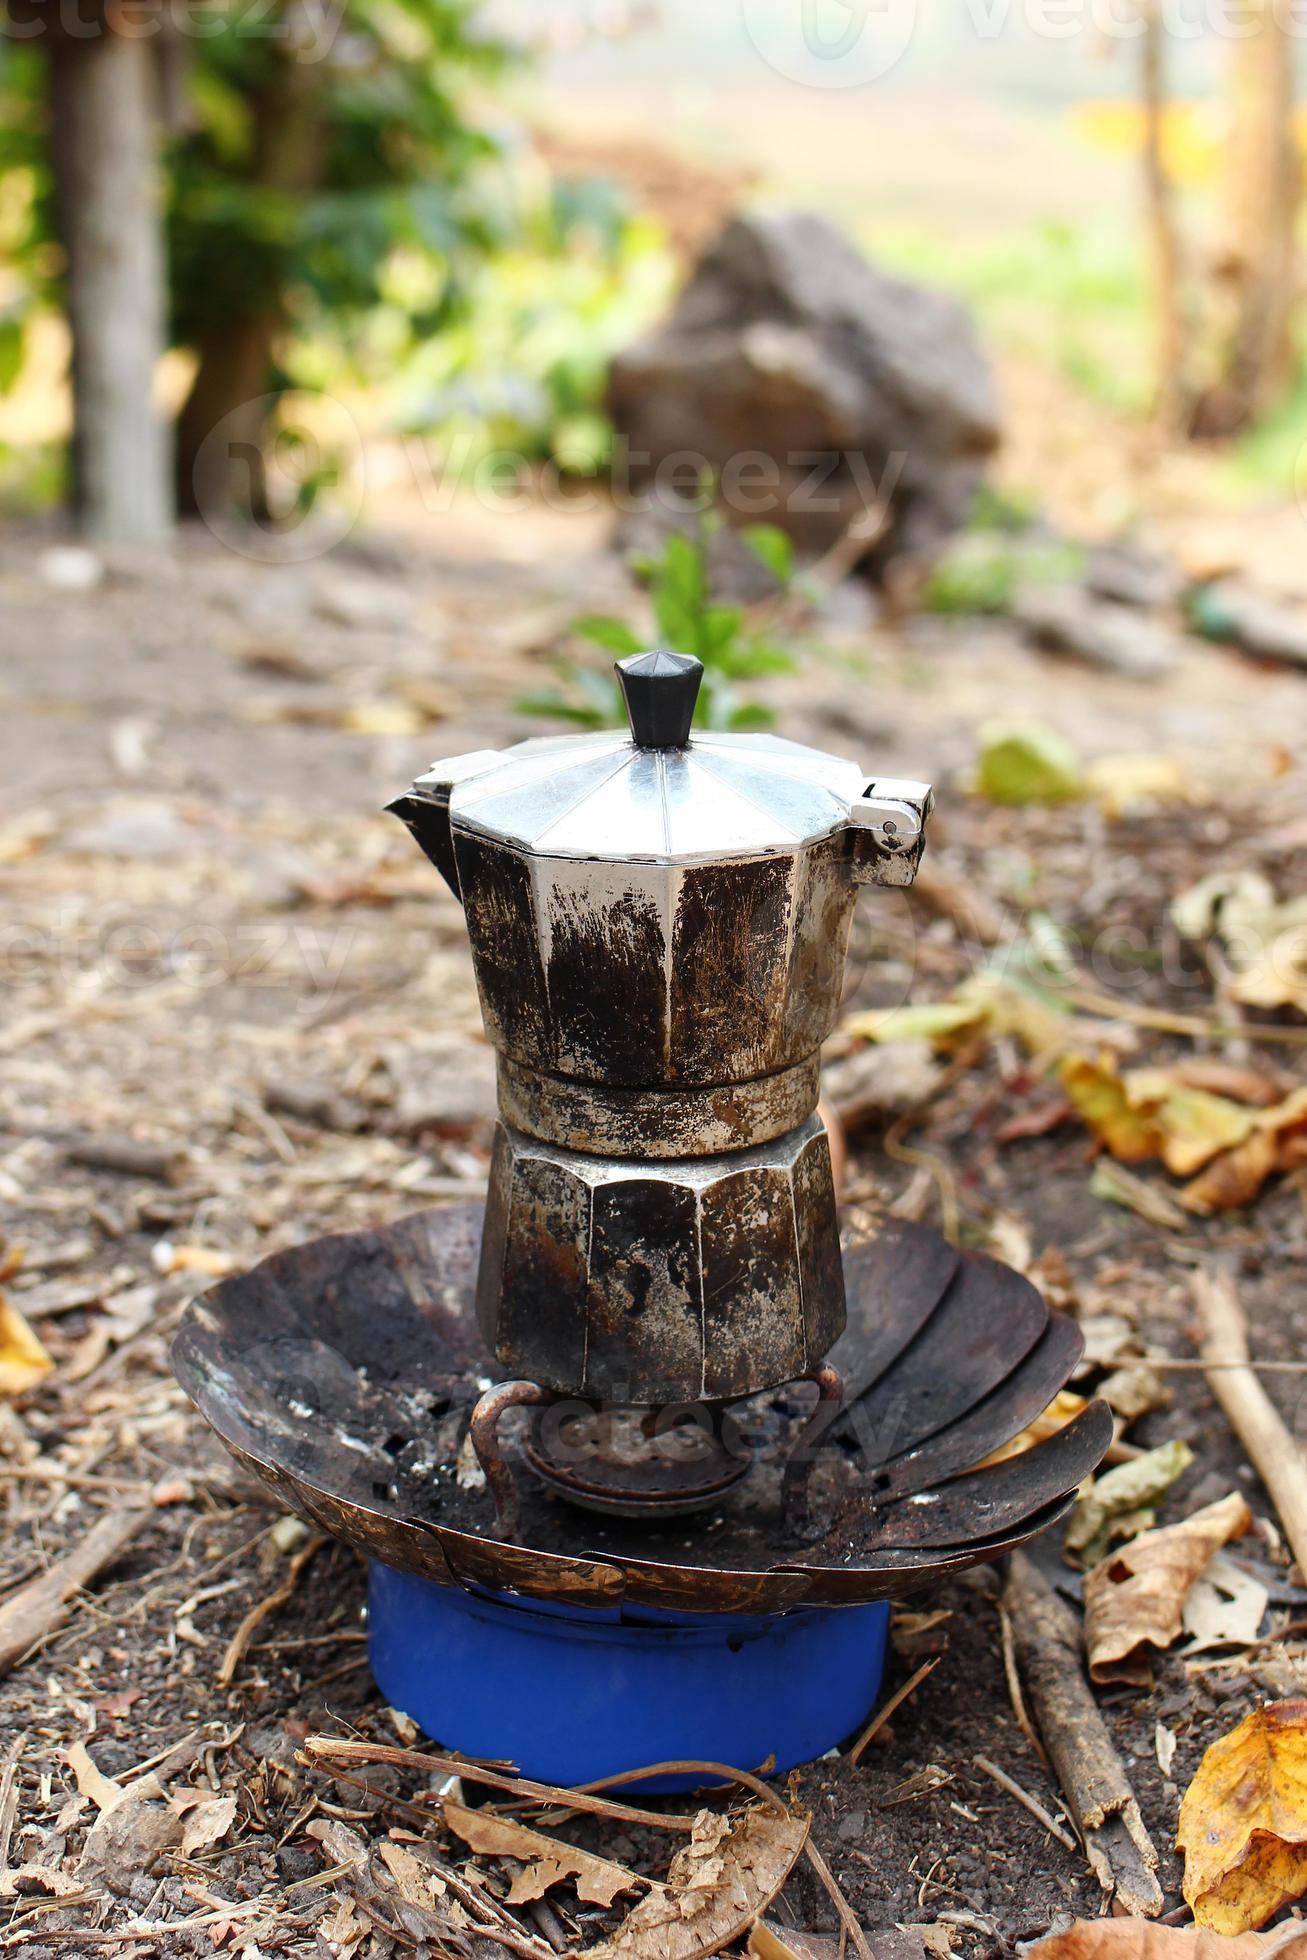 https://static.vecteezy.com/system/resources/previews/012/679/571/large_2x/geyser-coffee-maker-with-fresh-hot-coffee-on-portable-gas-burner-on-a-campsite-photo.jpg